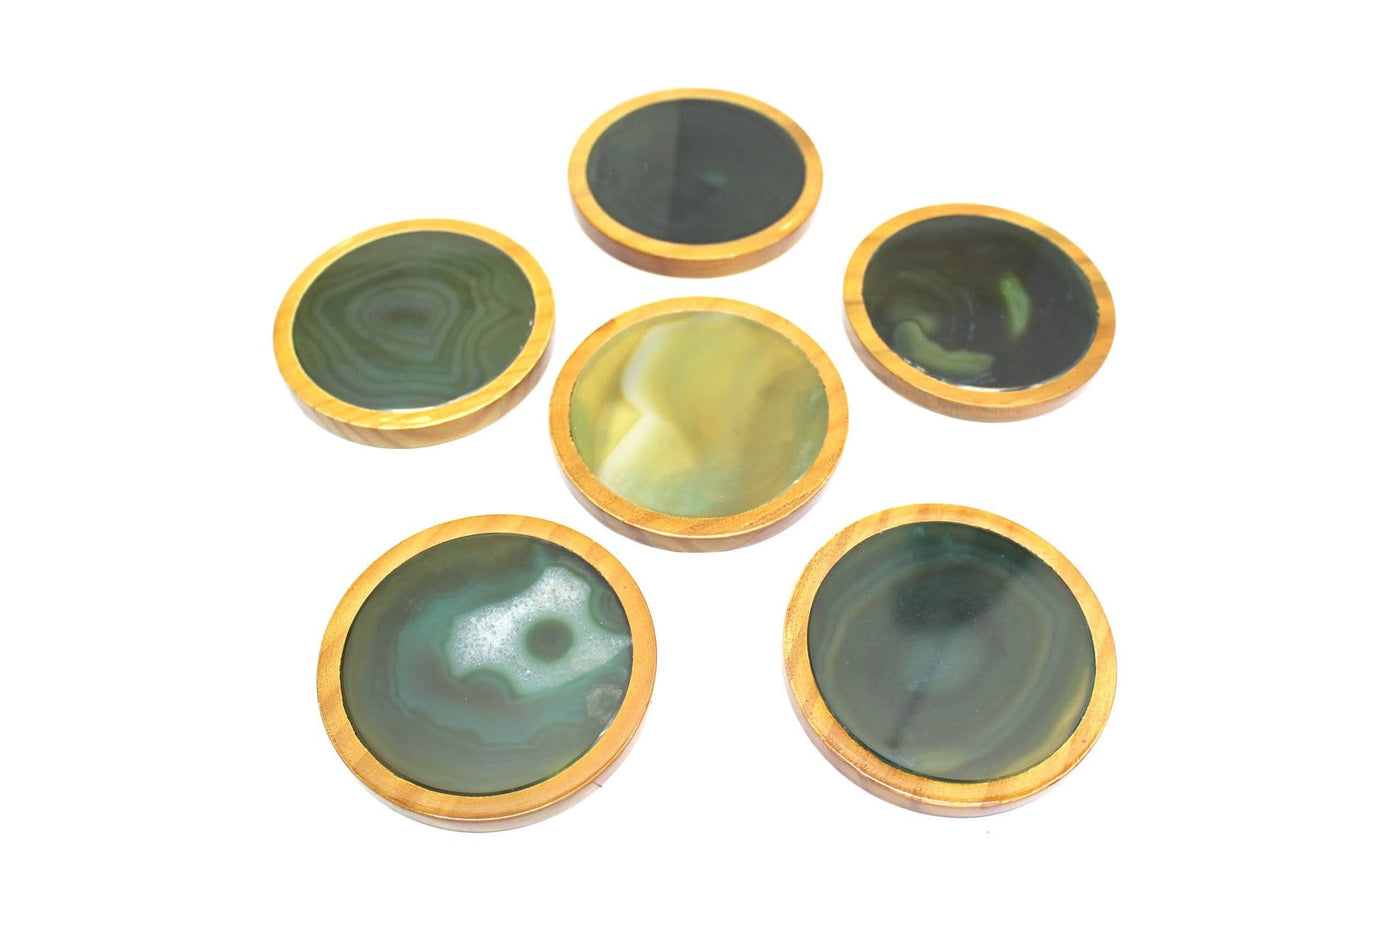 Agate coasters expanded to show color and pattern variation.